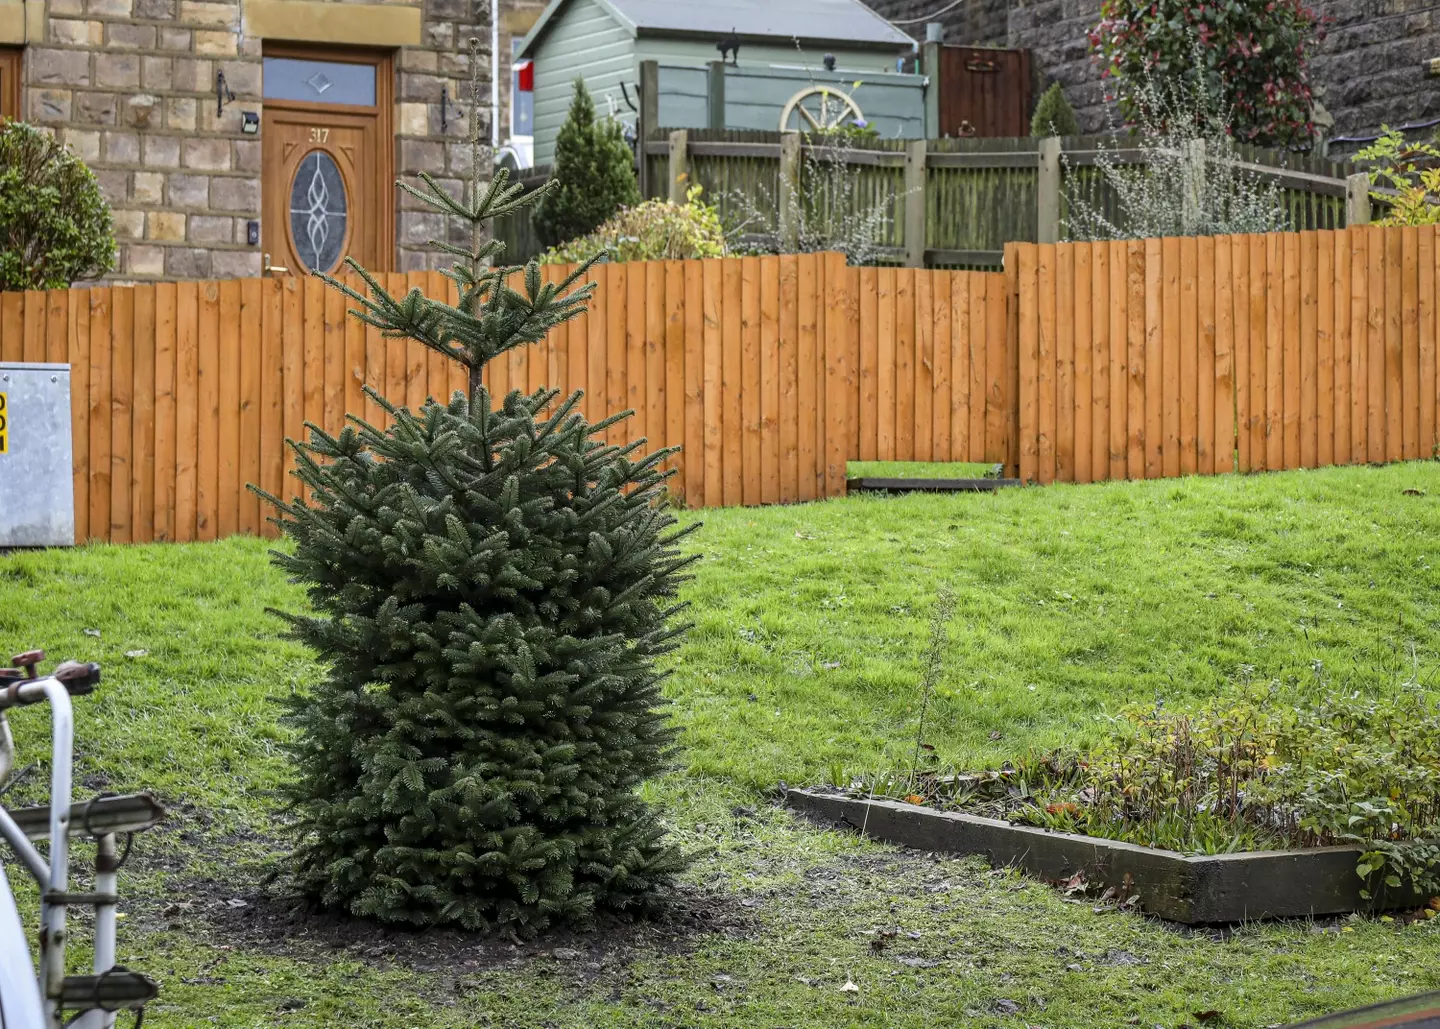 Local residents have complained about the size of their town's Christmas tree.